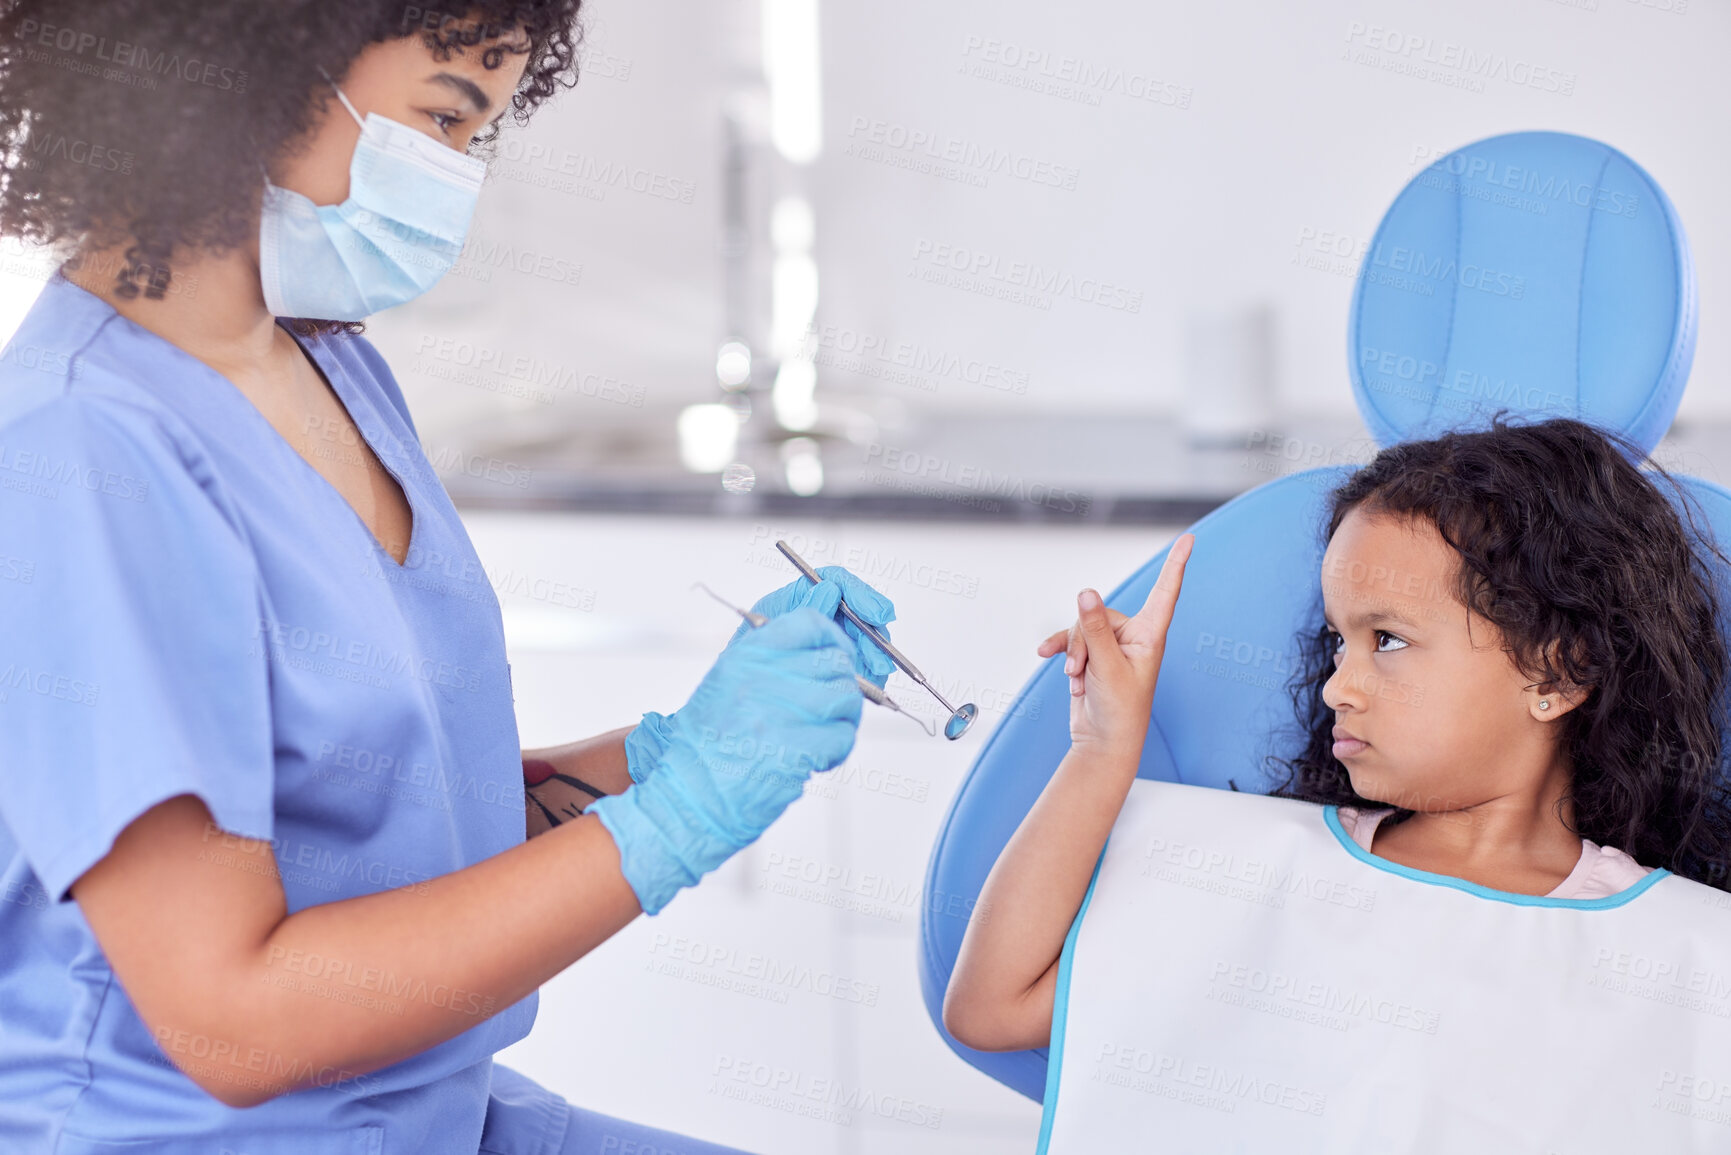 Buy stock photo Shot of a little girl looking upset at the dentist